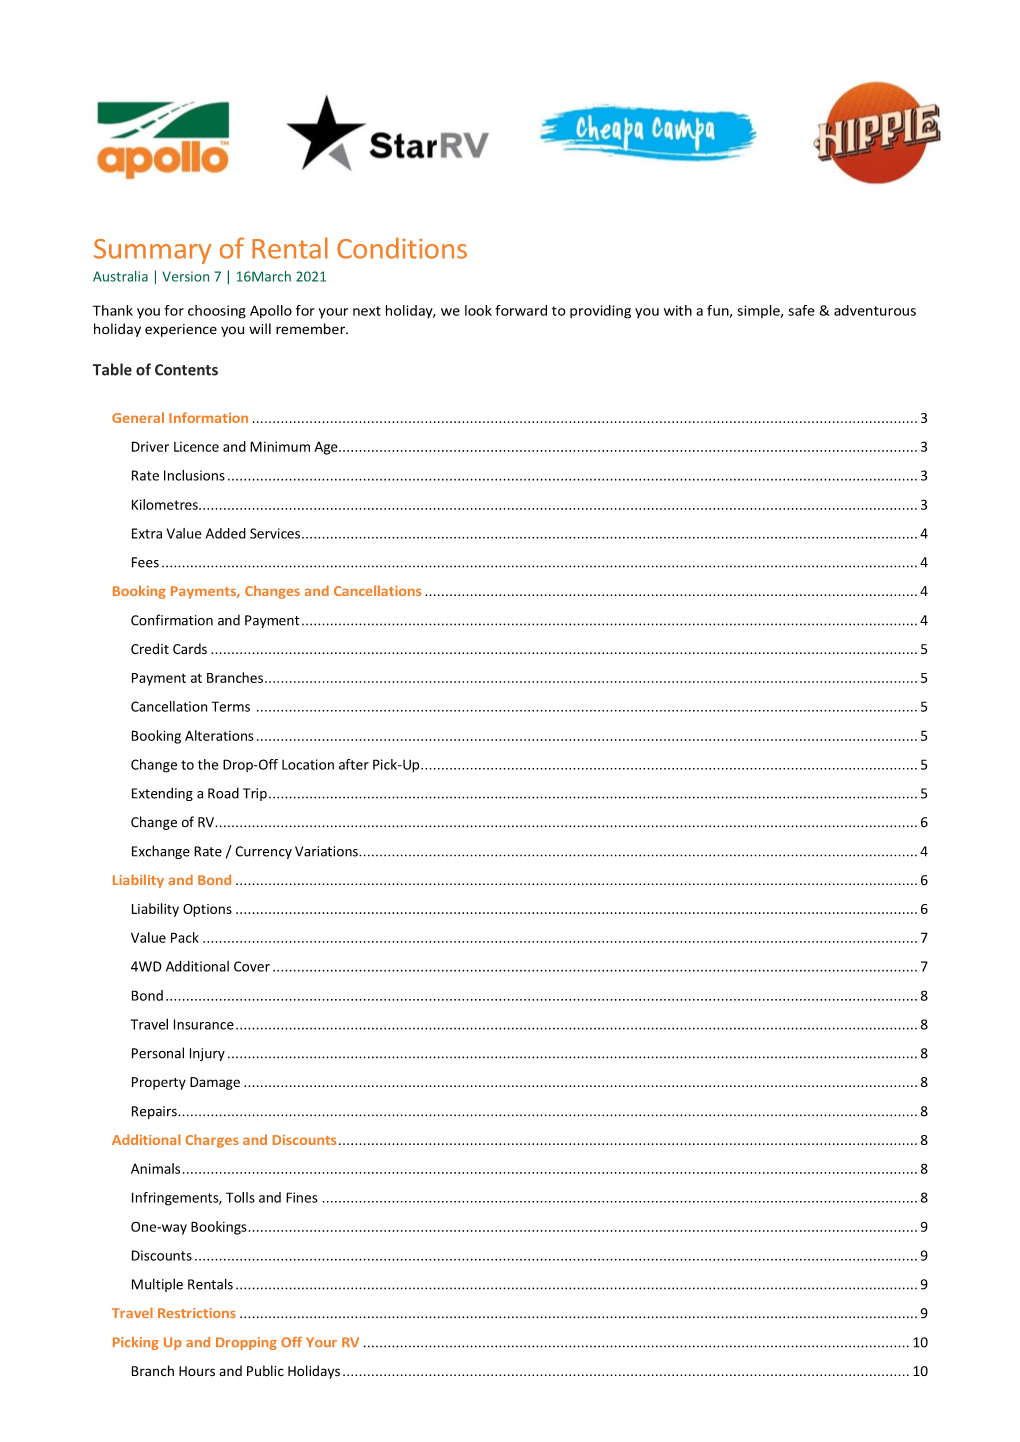 Summary of Rental Conditions Australia | Version 7 | 16March 2021